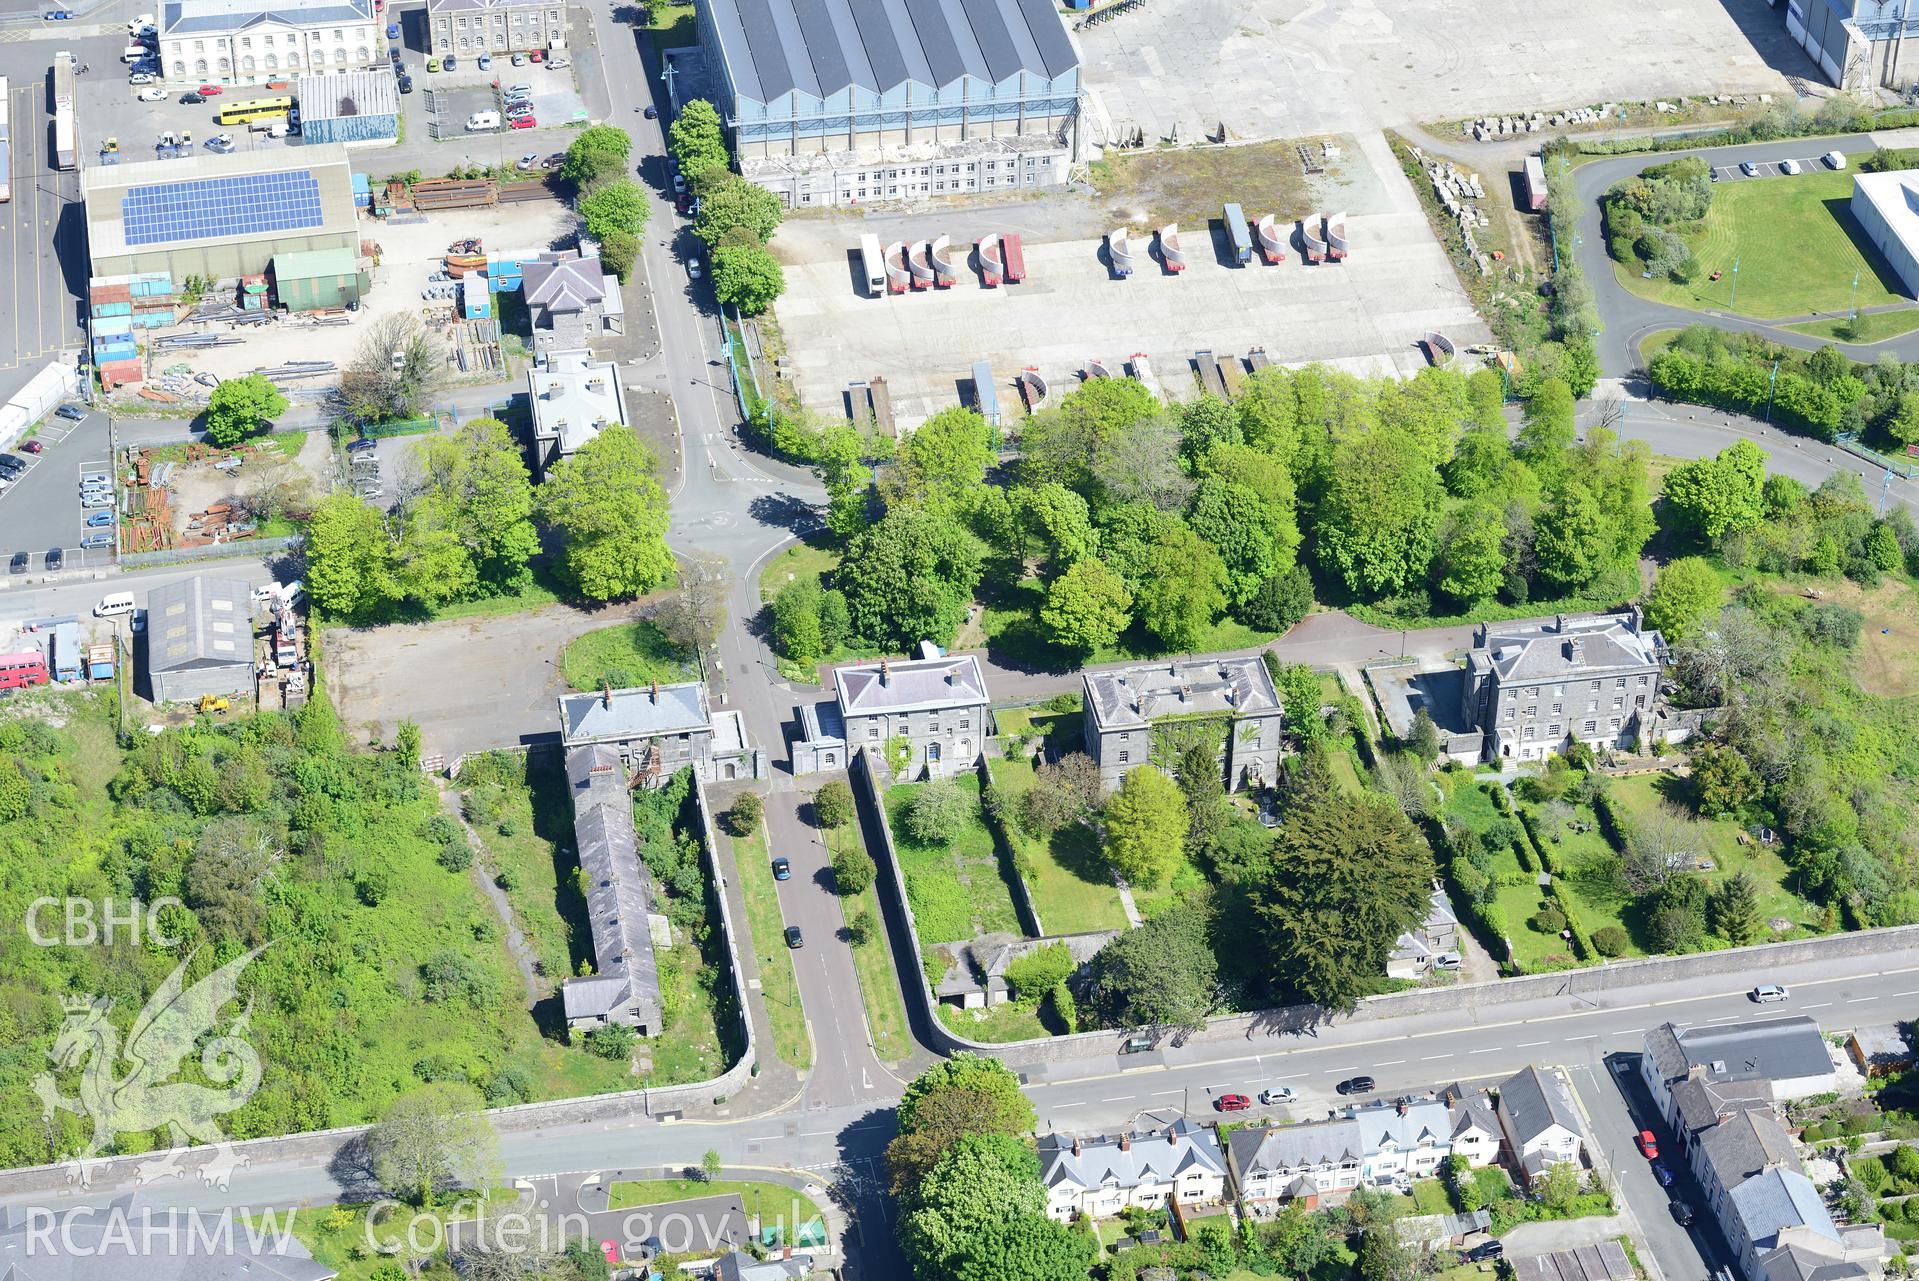 Guard House; RAF Post Office; Coach House; Senior Officers Houses; Capt.Supt.'s House & Port Hotel, Pembroke Dockyard. Oblique aerial photograph taken during Royal Commission?s programme of archaeological aerial reconnaissance by Toby Driver on 13/5/2015.